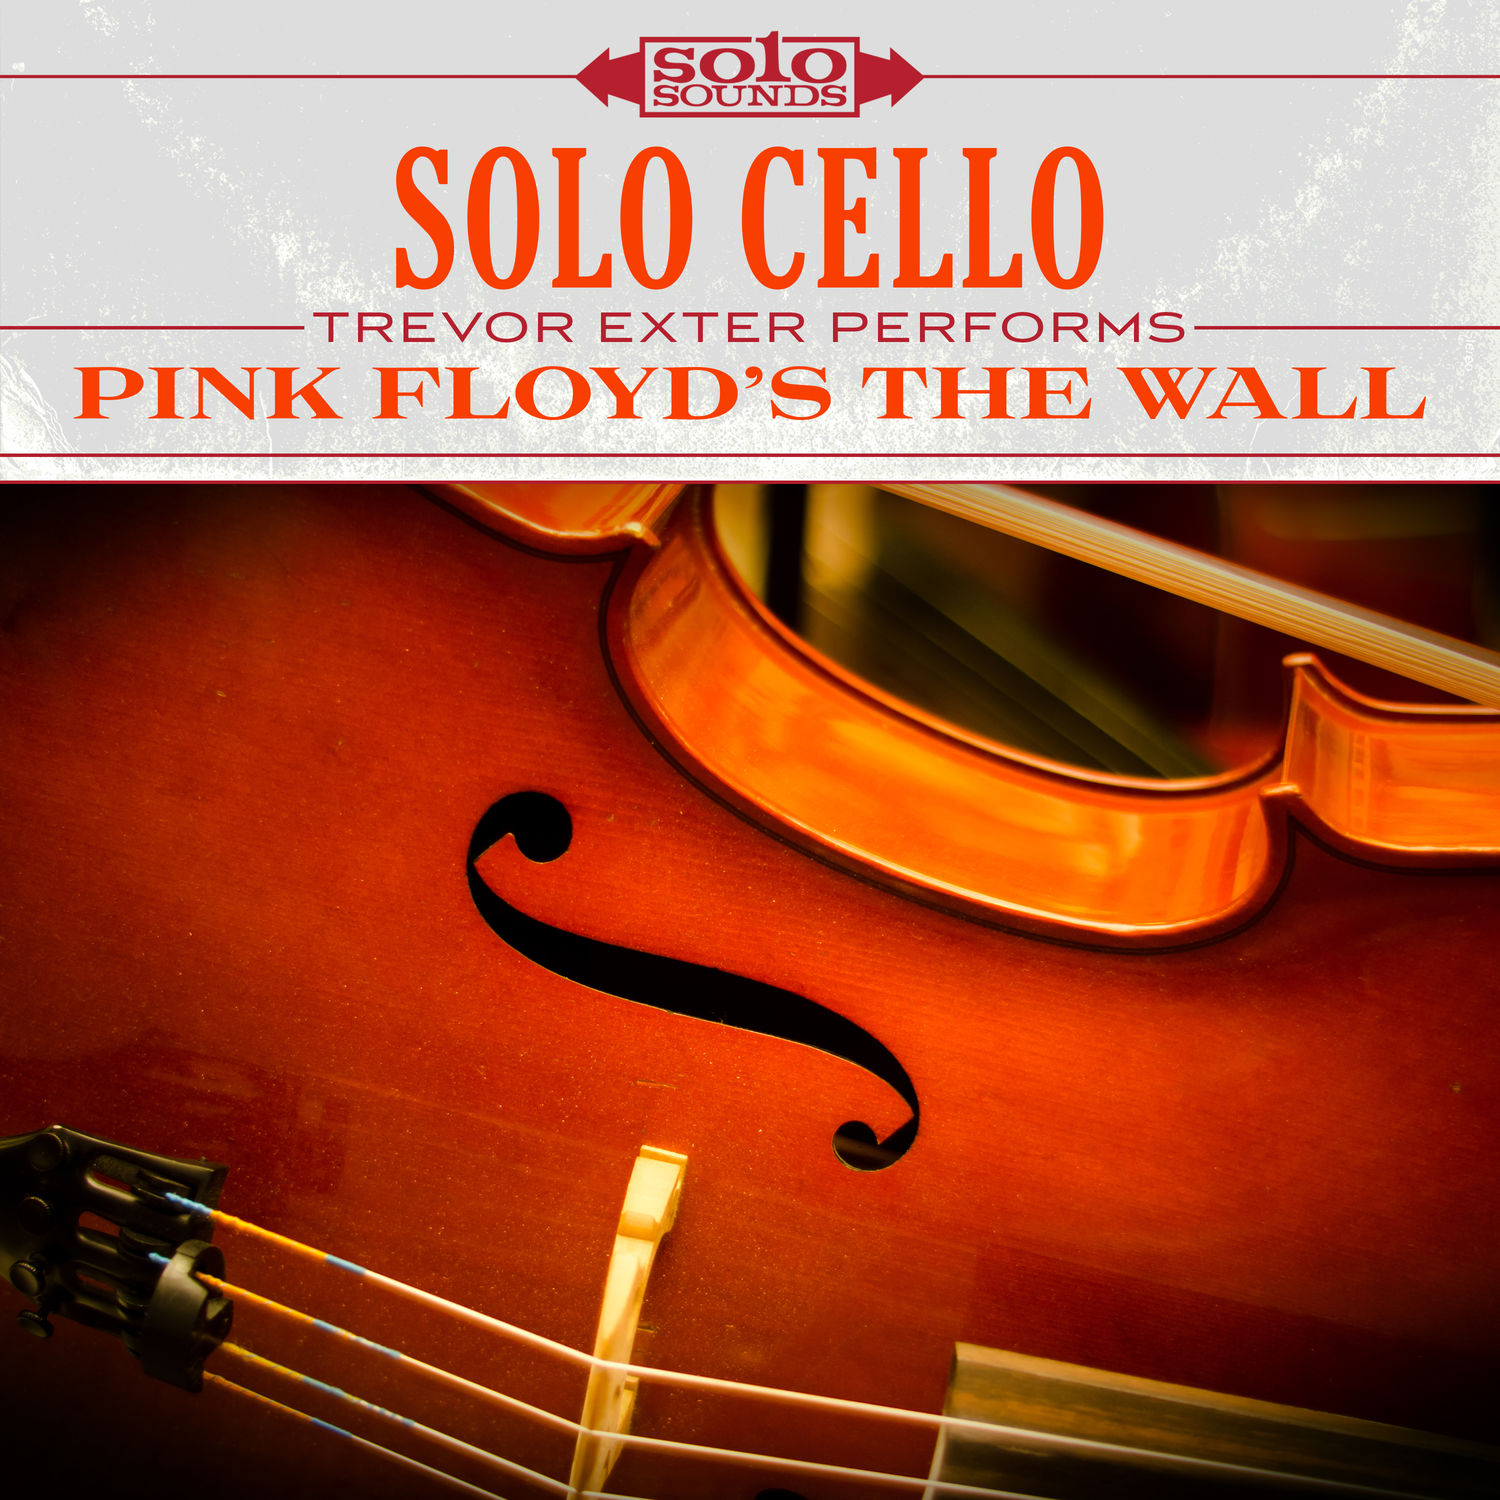 Trevor Exter - Solo Cello: Trevor Exter Performs Pink Floyd’s the Wall (2017) [FLAC 24bit/192kHz]